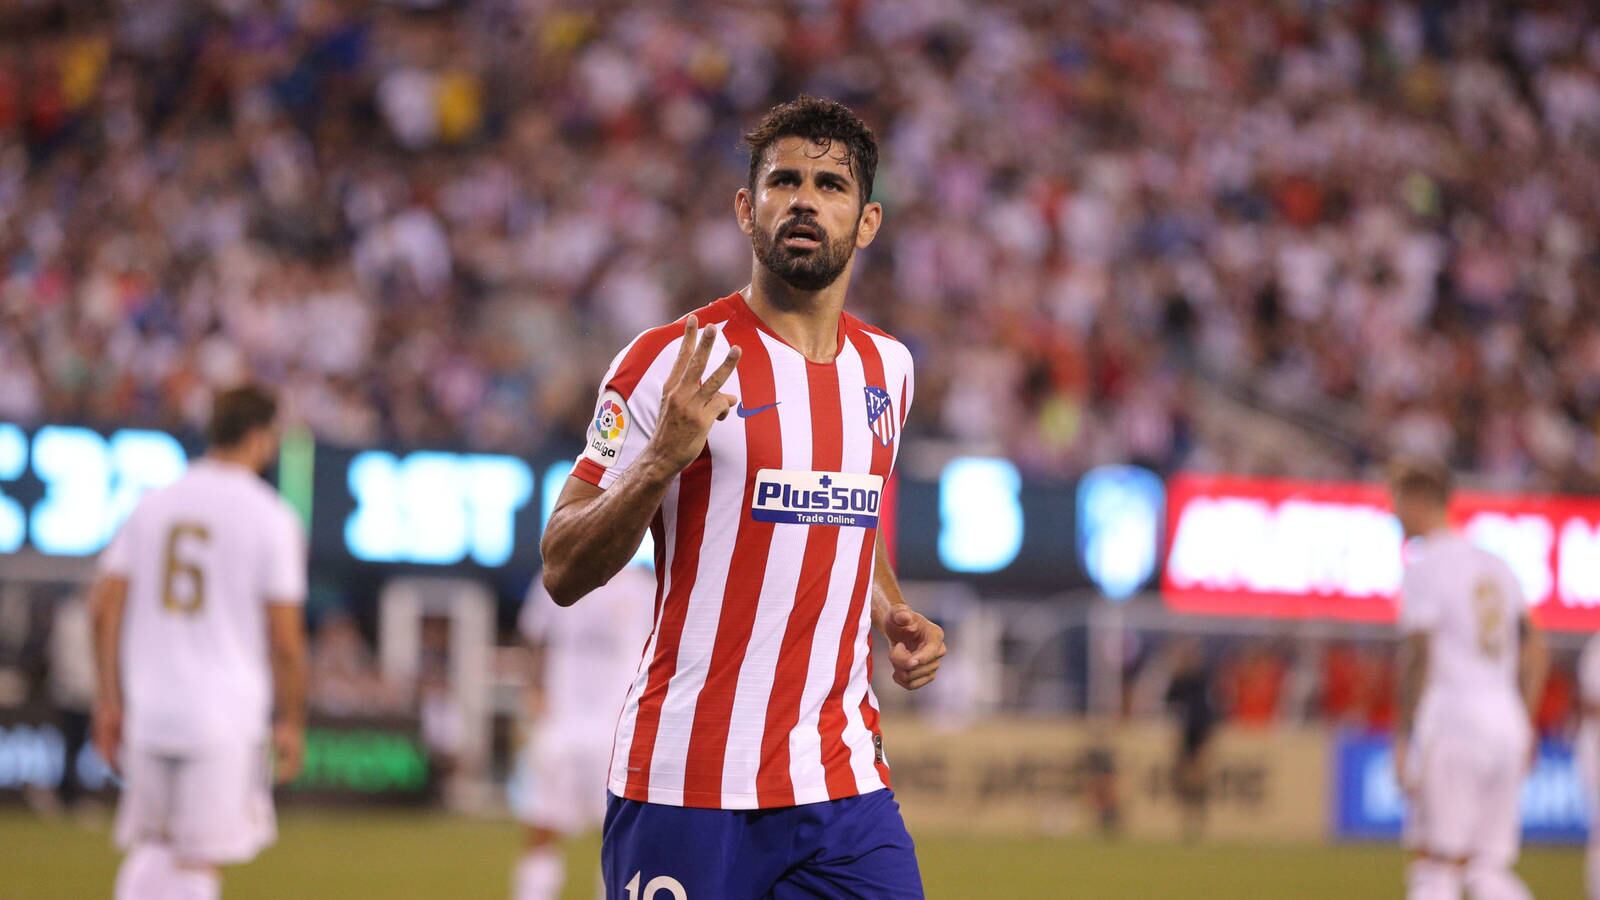 How much would cost to bring Diego Costa to MLS after he was ejected by Atlético de Madrid?